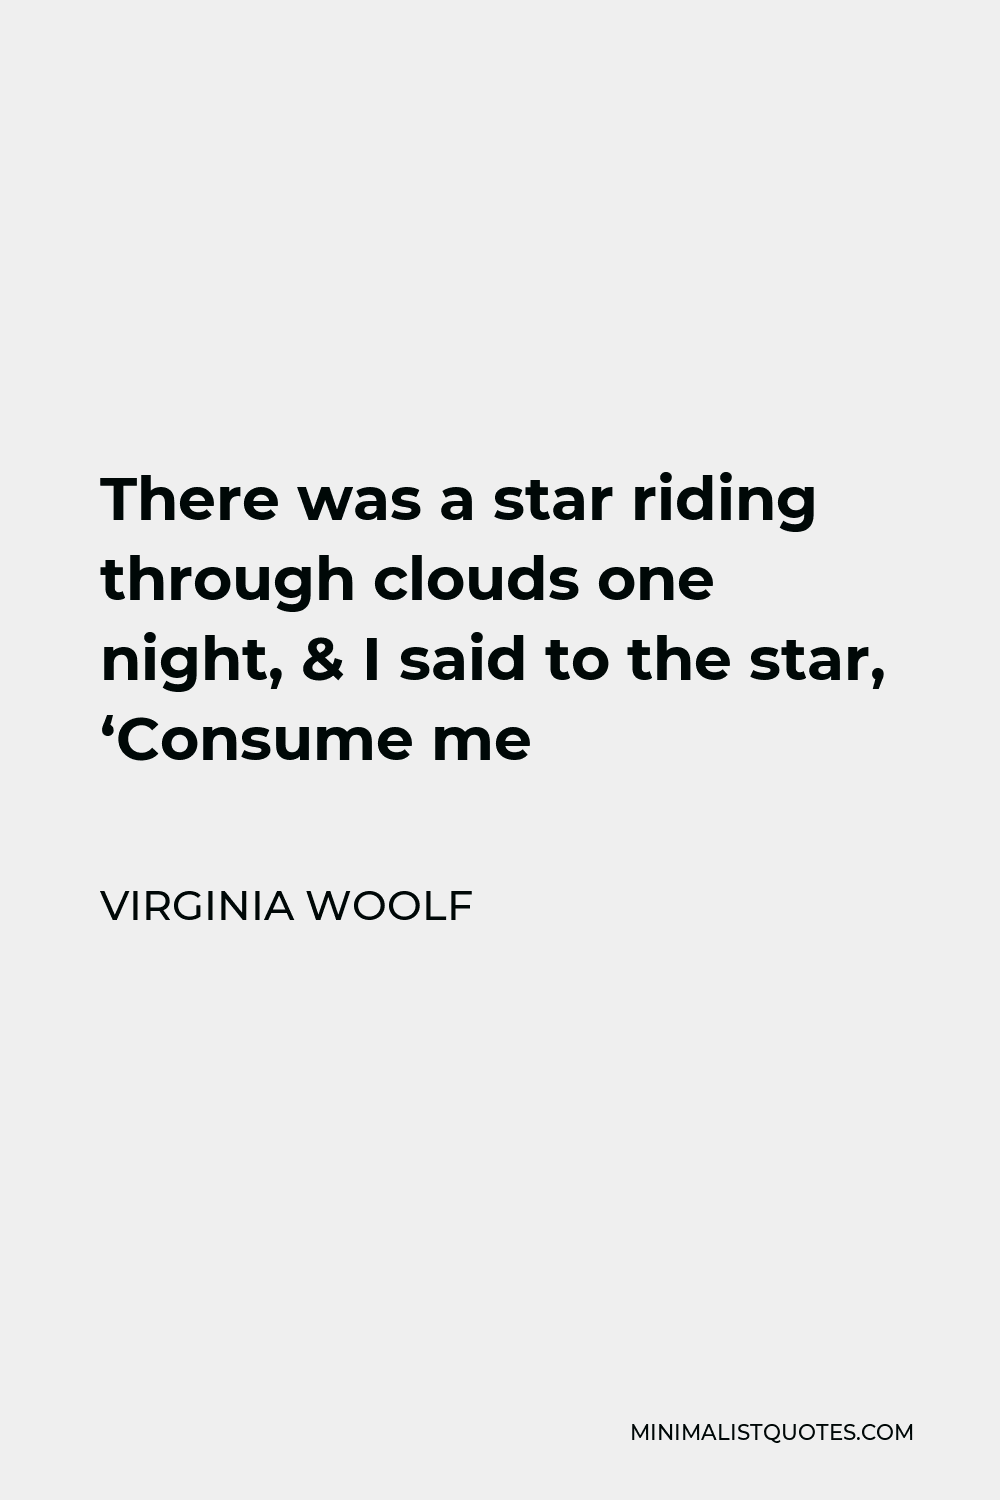 Virginia Woolf Quote - There was a star riding through clouds one night, & I said to the star, ‘Consume me